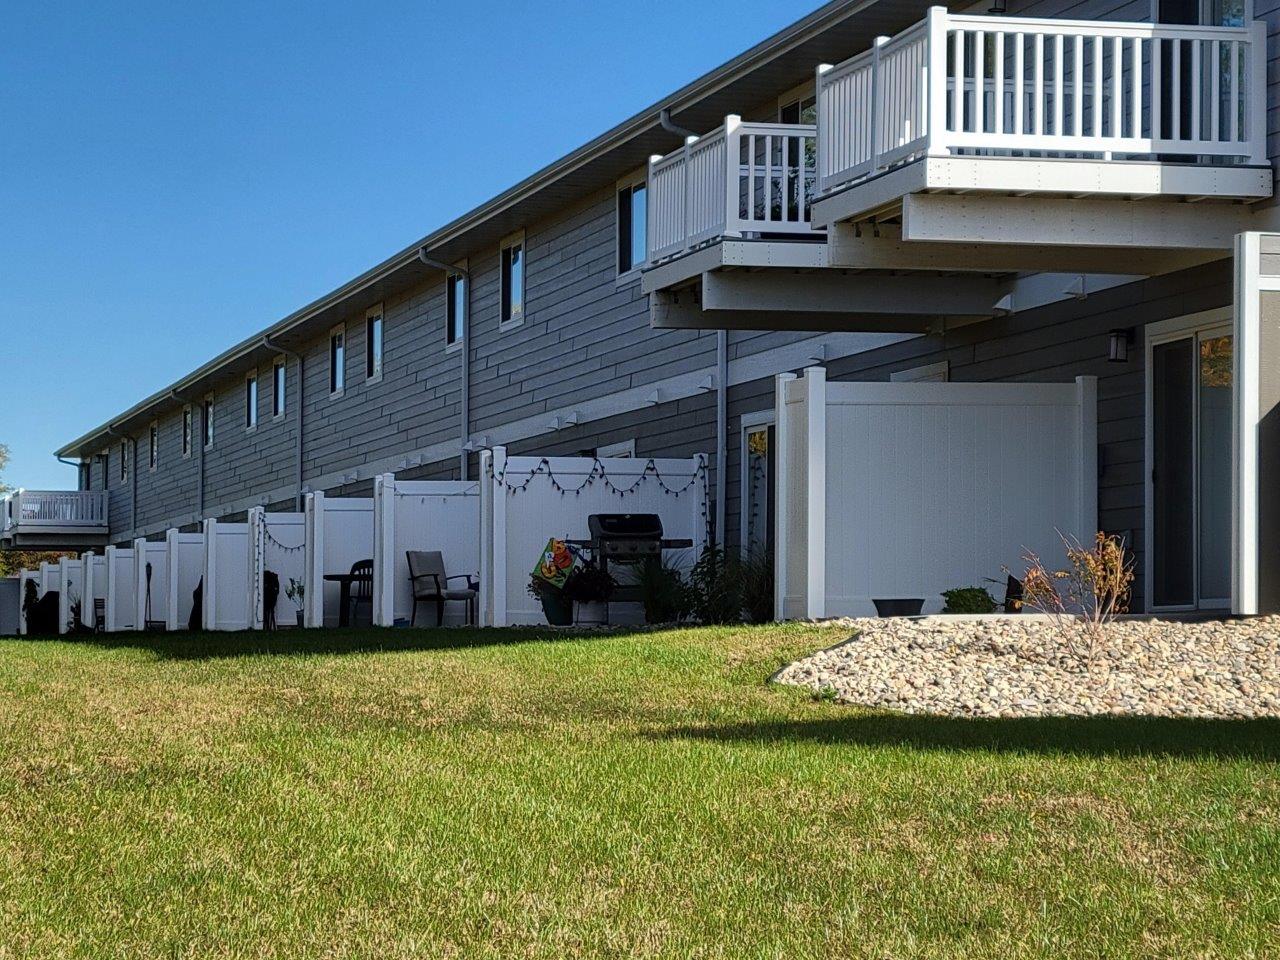 Photo of WHITING COURT APARTMENTS. Affordable housing located at 1006 WHITING DRIVE YANKTON, SD 57078